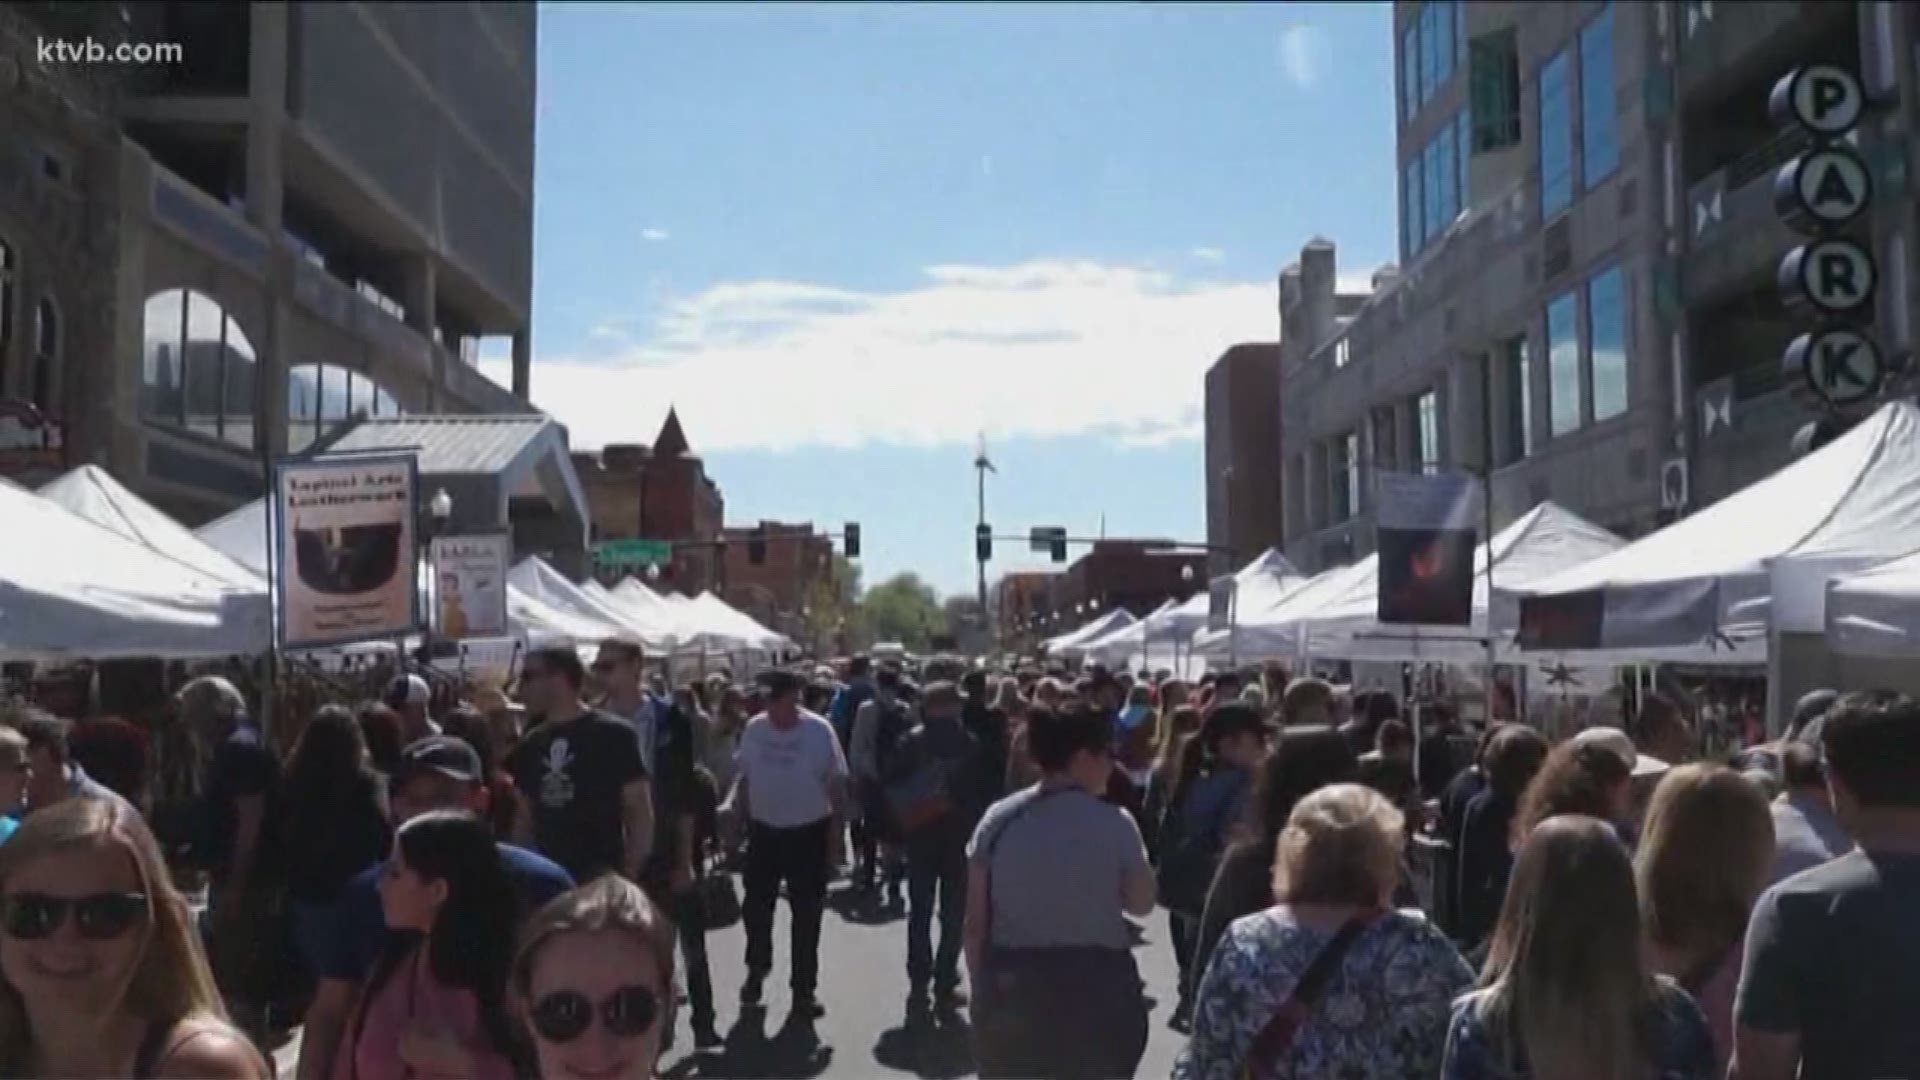 The market, usually held in downtown Boise, will be open from 9 a.m. to 2 p.m. Saturday at the 34th Street Market site.